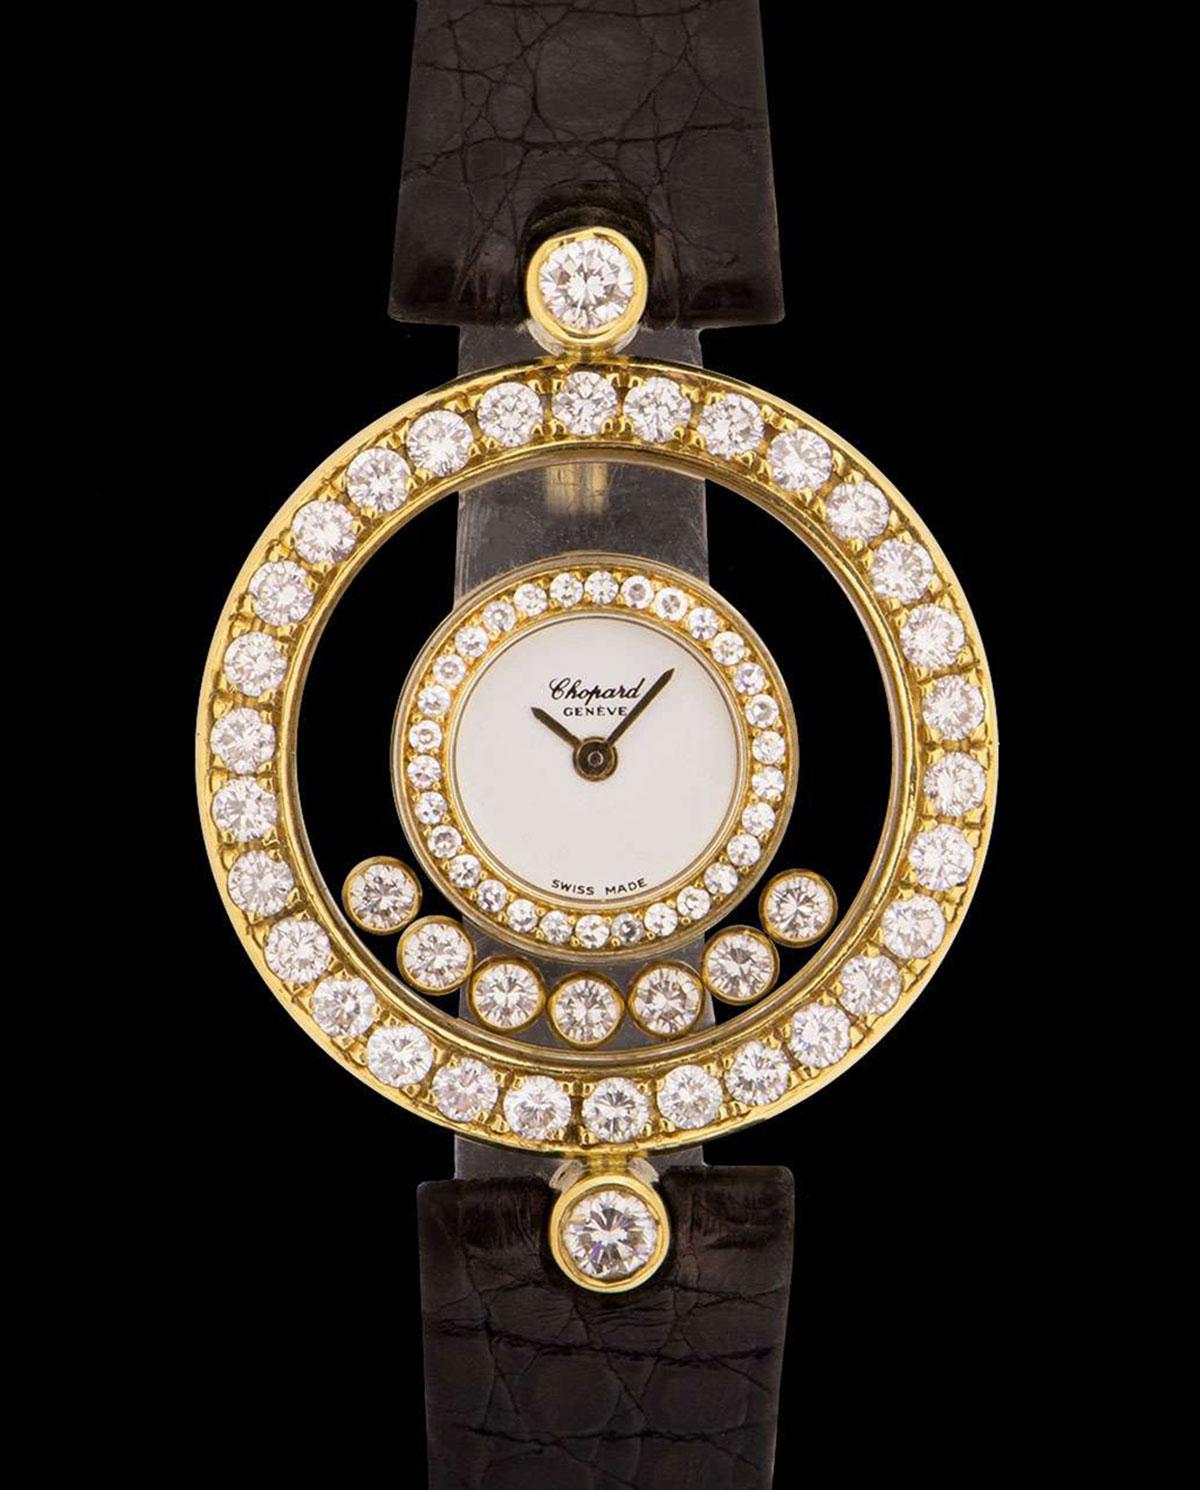 An 18k Yellow Gold Happy Diamonds Ladies 26mm Wristwatch, silver dial, a fixed 18k yellow gold inner bezel set with 30 round brilliant cut diamonds, 7 floating rubover round brilliant cut diamonds, a fixed 18k yellow gold outer bezel set with 30